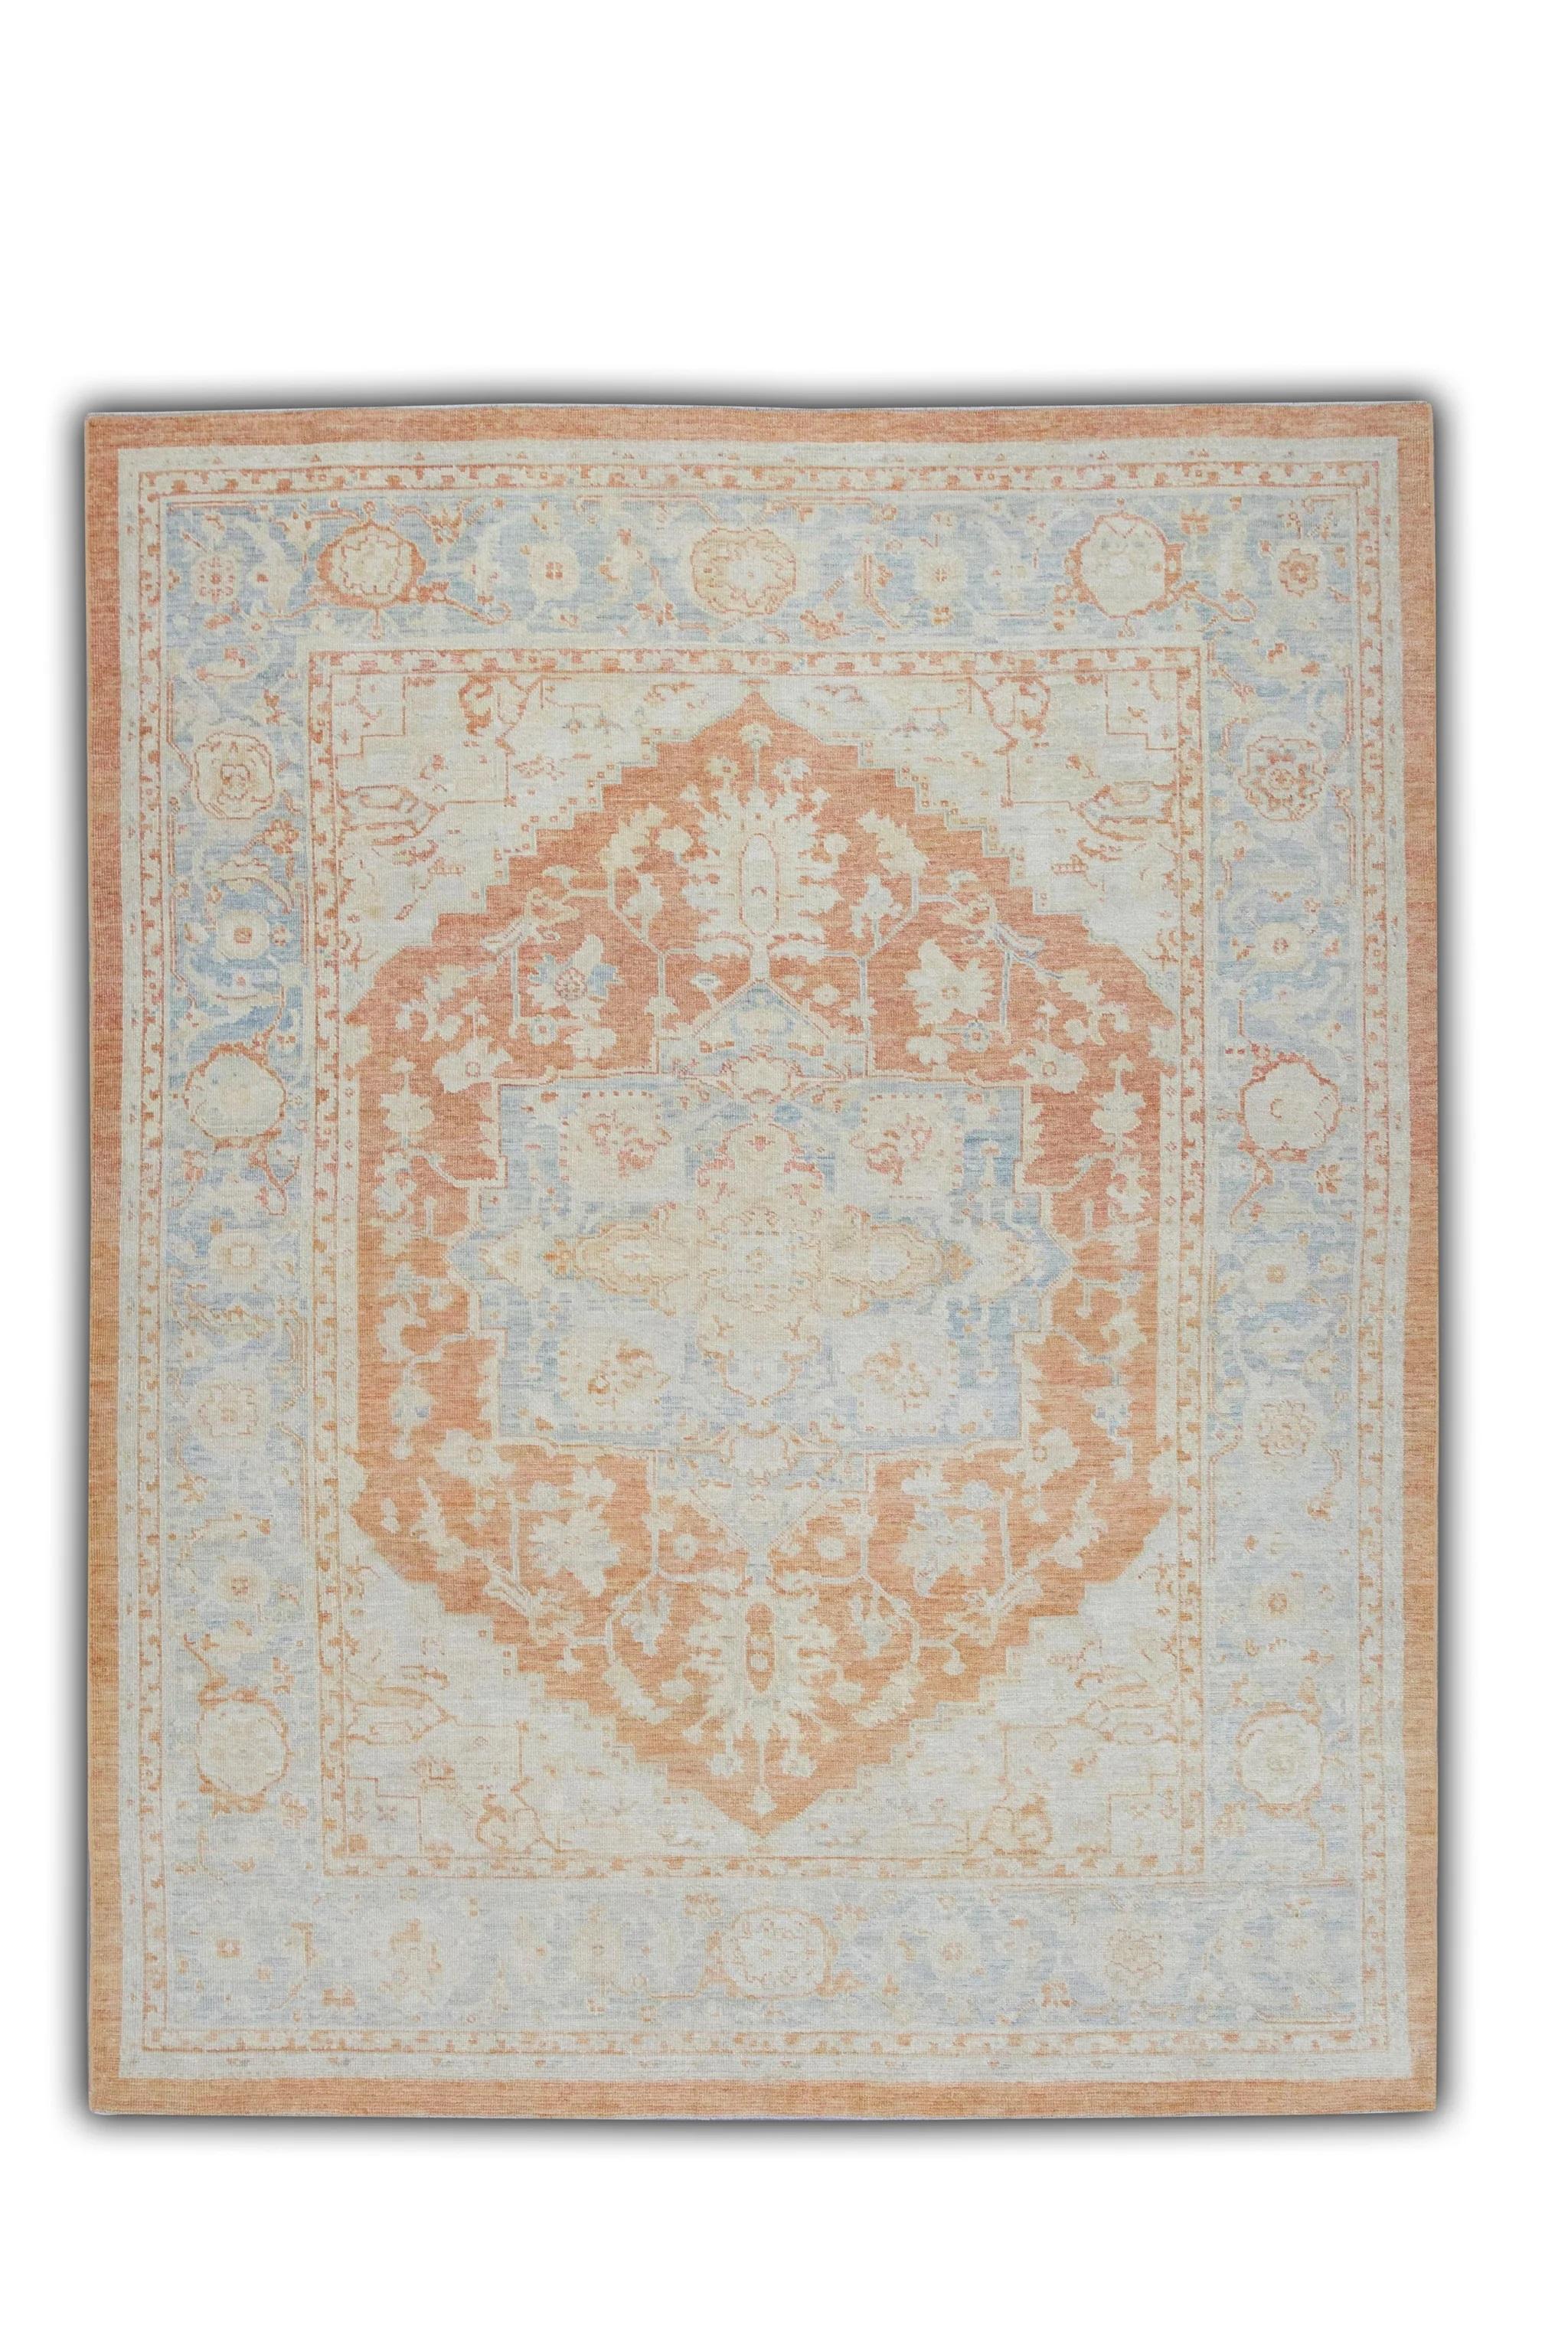 Floral Turkish Finewoven Wool Oushak Rug in Salmon Pink and Baby Blue 6'2